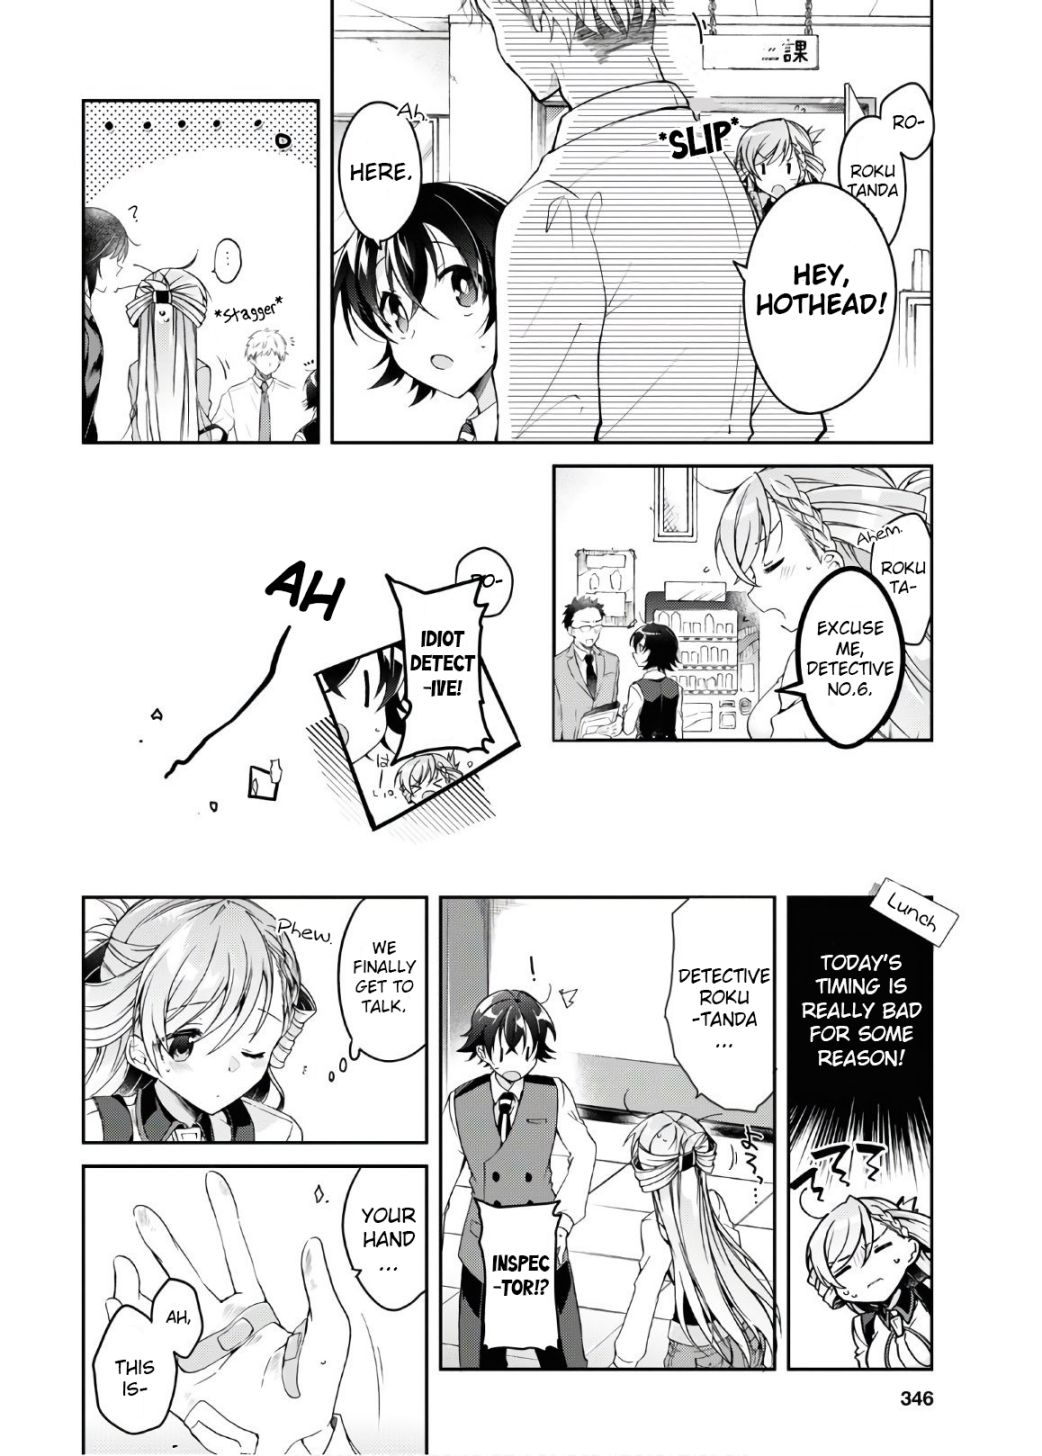 Isshiki-san Wants to Know About Love. - chapter 2 - #6